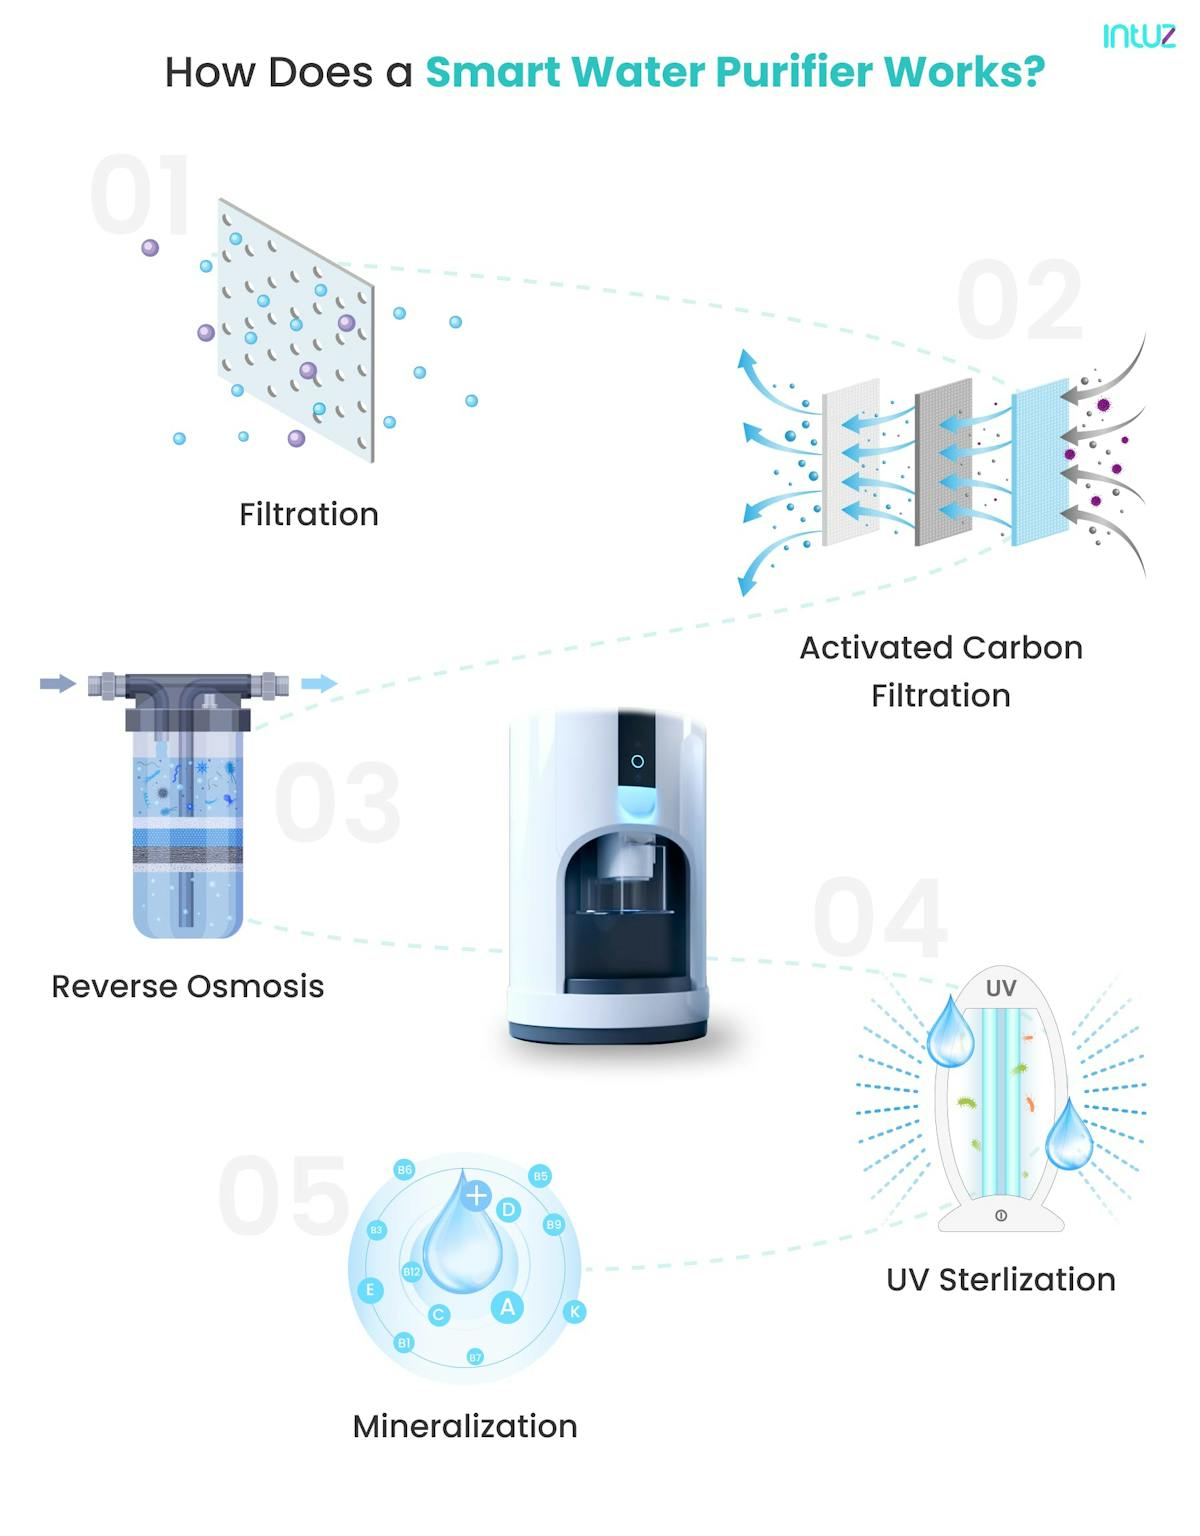 How Does a Smart Water Purifier Work